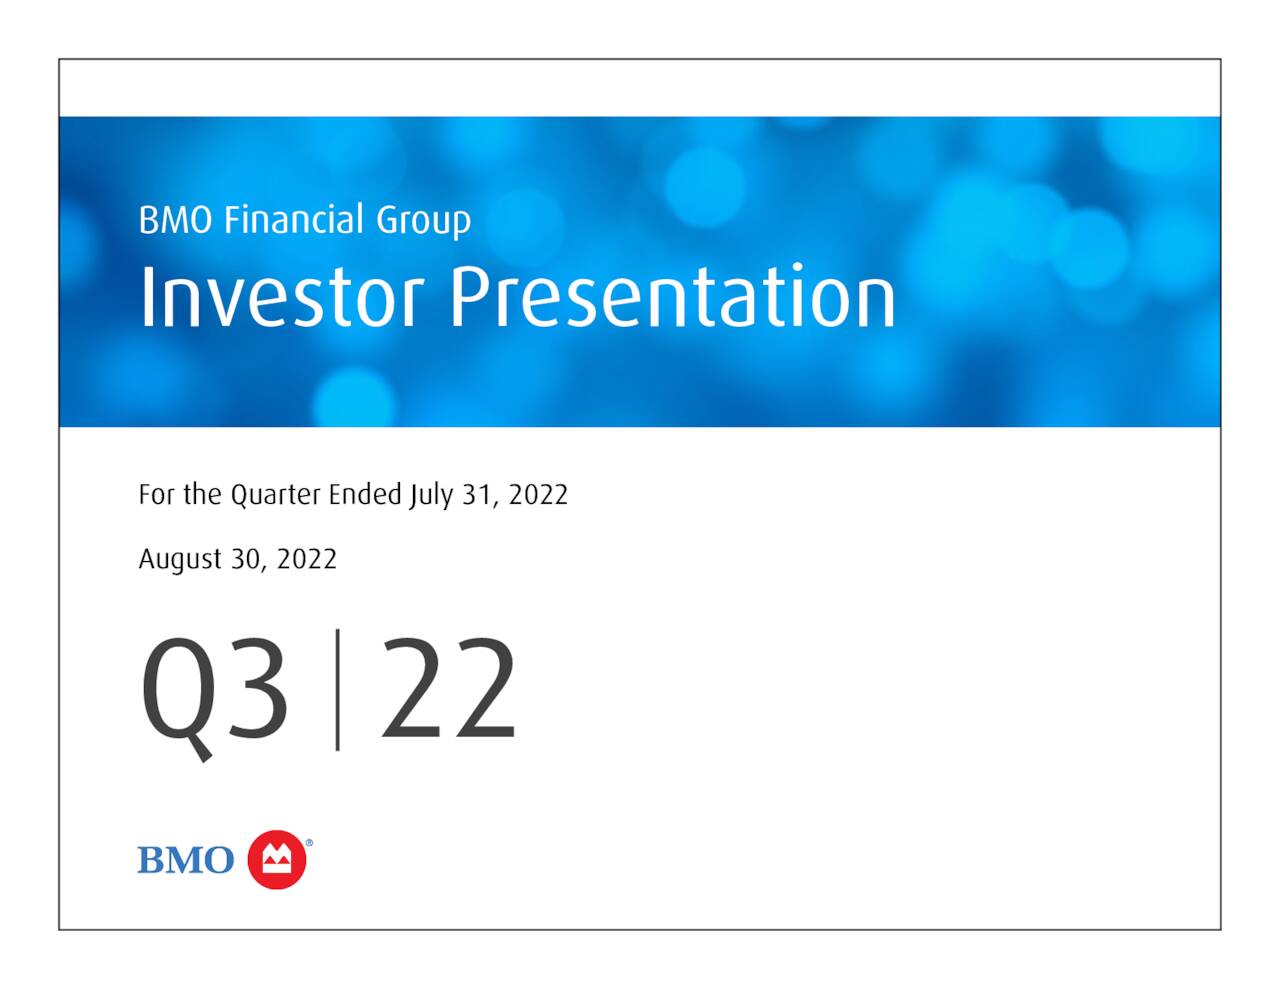 Bank of Montreal 2022 Q3 Results Earnings Call Presentation (NYSE